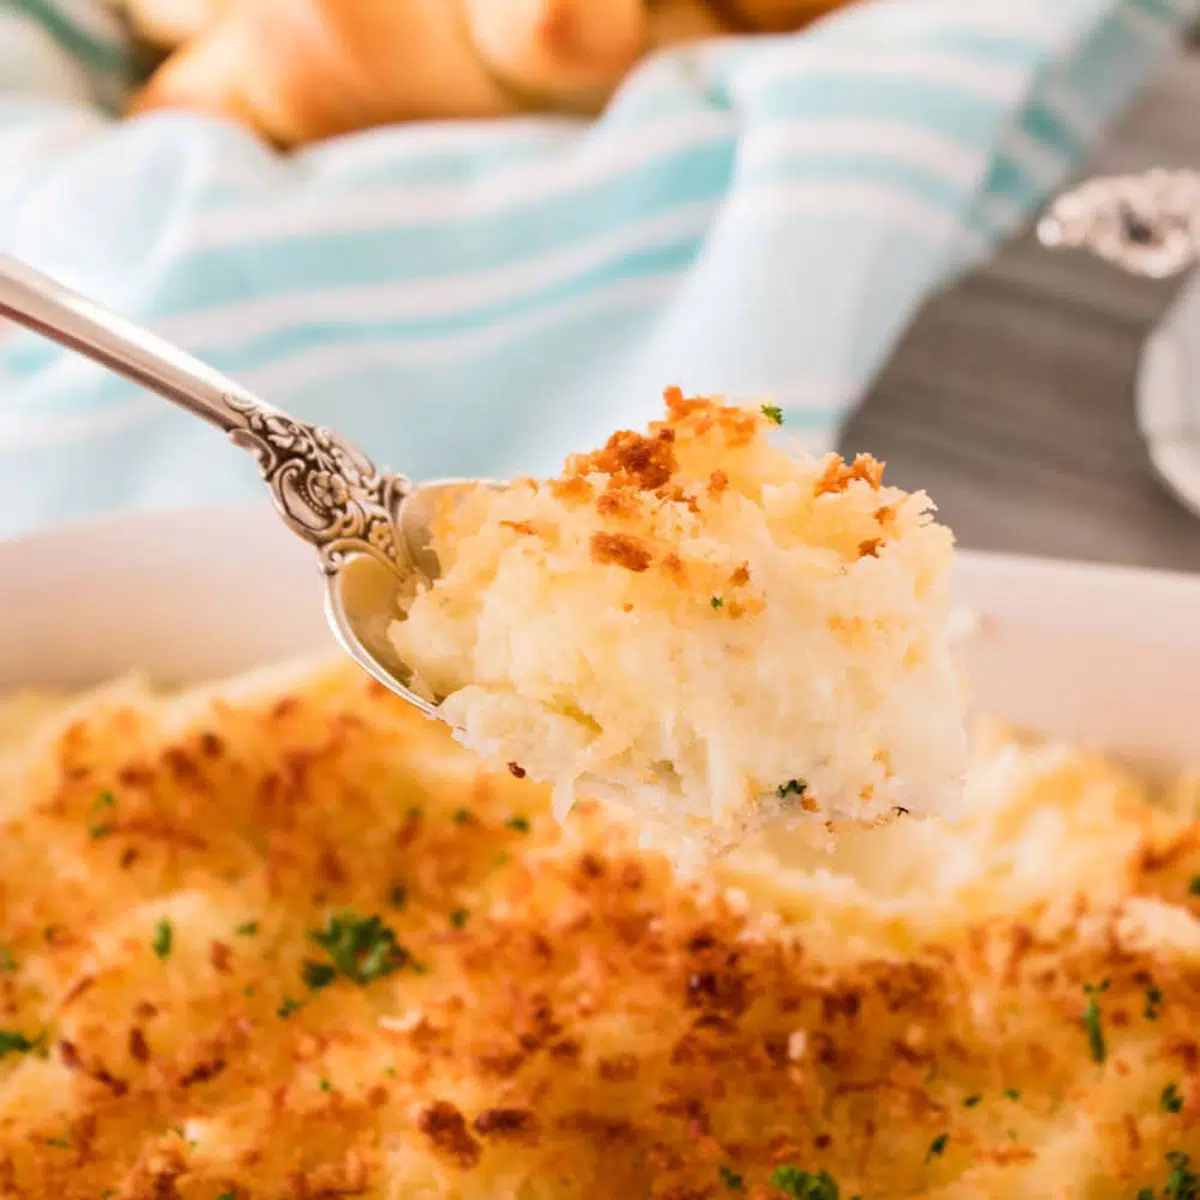 Parmesan roasted mashed potatoes being scooped up with a large spoon.